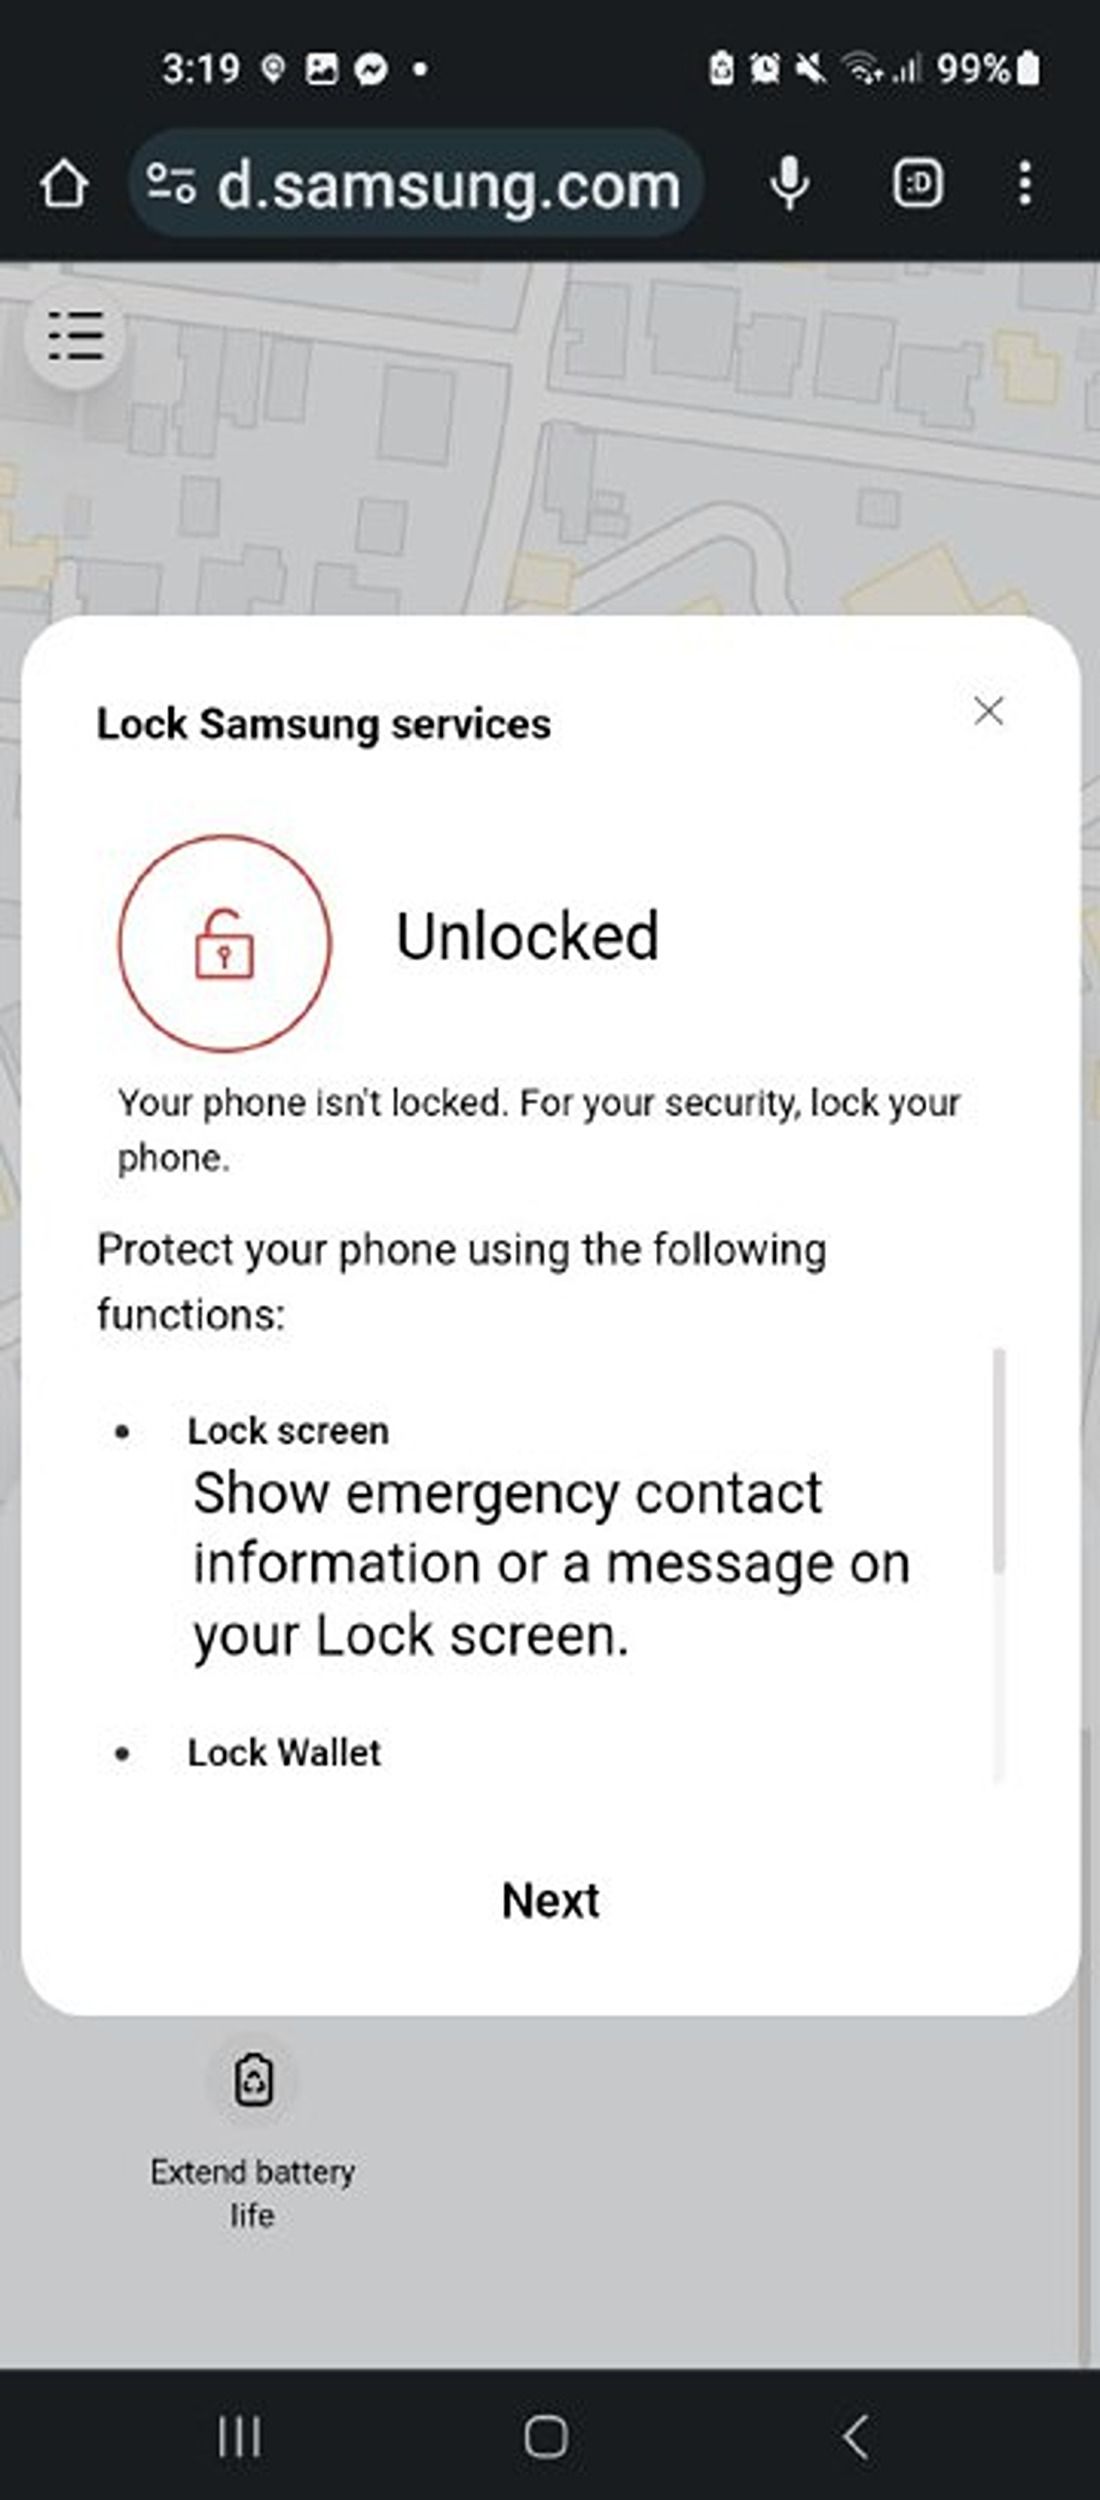 Lock functionality in Samsung SmartThings Find